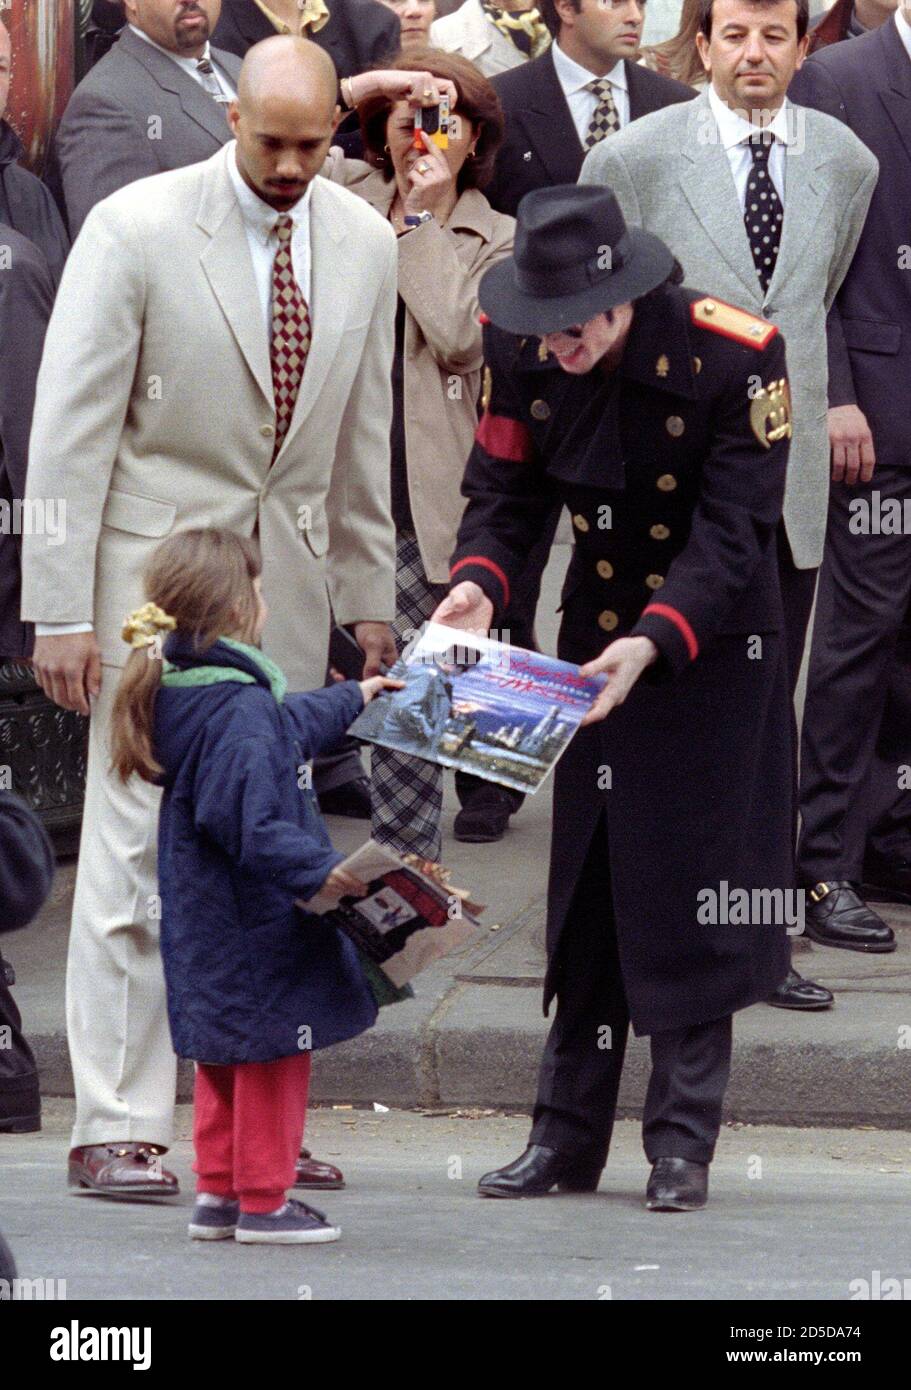 american-pop-star-michael-jackson-r-gives-a-copy-of-his-new-album-to-an-unidentified-young-girl-as-he-leaves-the-grevin-museum-april-19-jackson-inaugurated-his-wax-double-executed-from-four-picturesthe-singer-offered-some-of-his-clothes-to-dress-the-model-for-the-museum-where-world-celebrities-and-french-historical-scenes-are-represented-2D5DA74.jpg